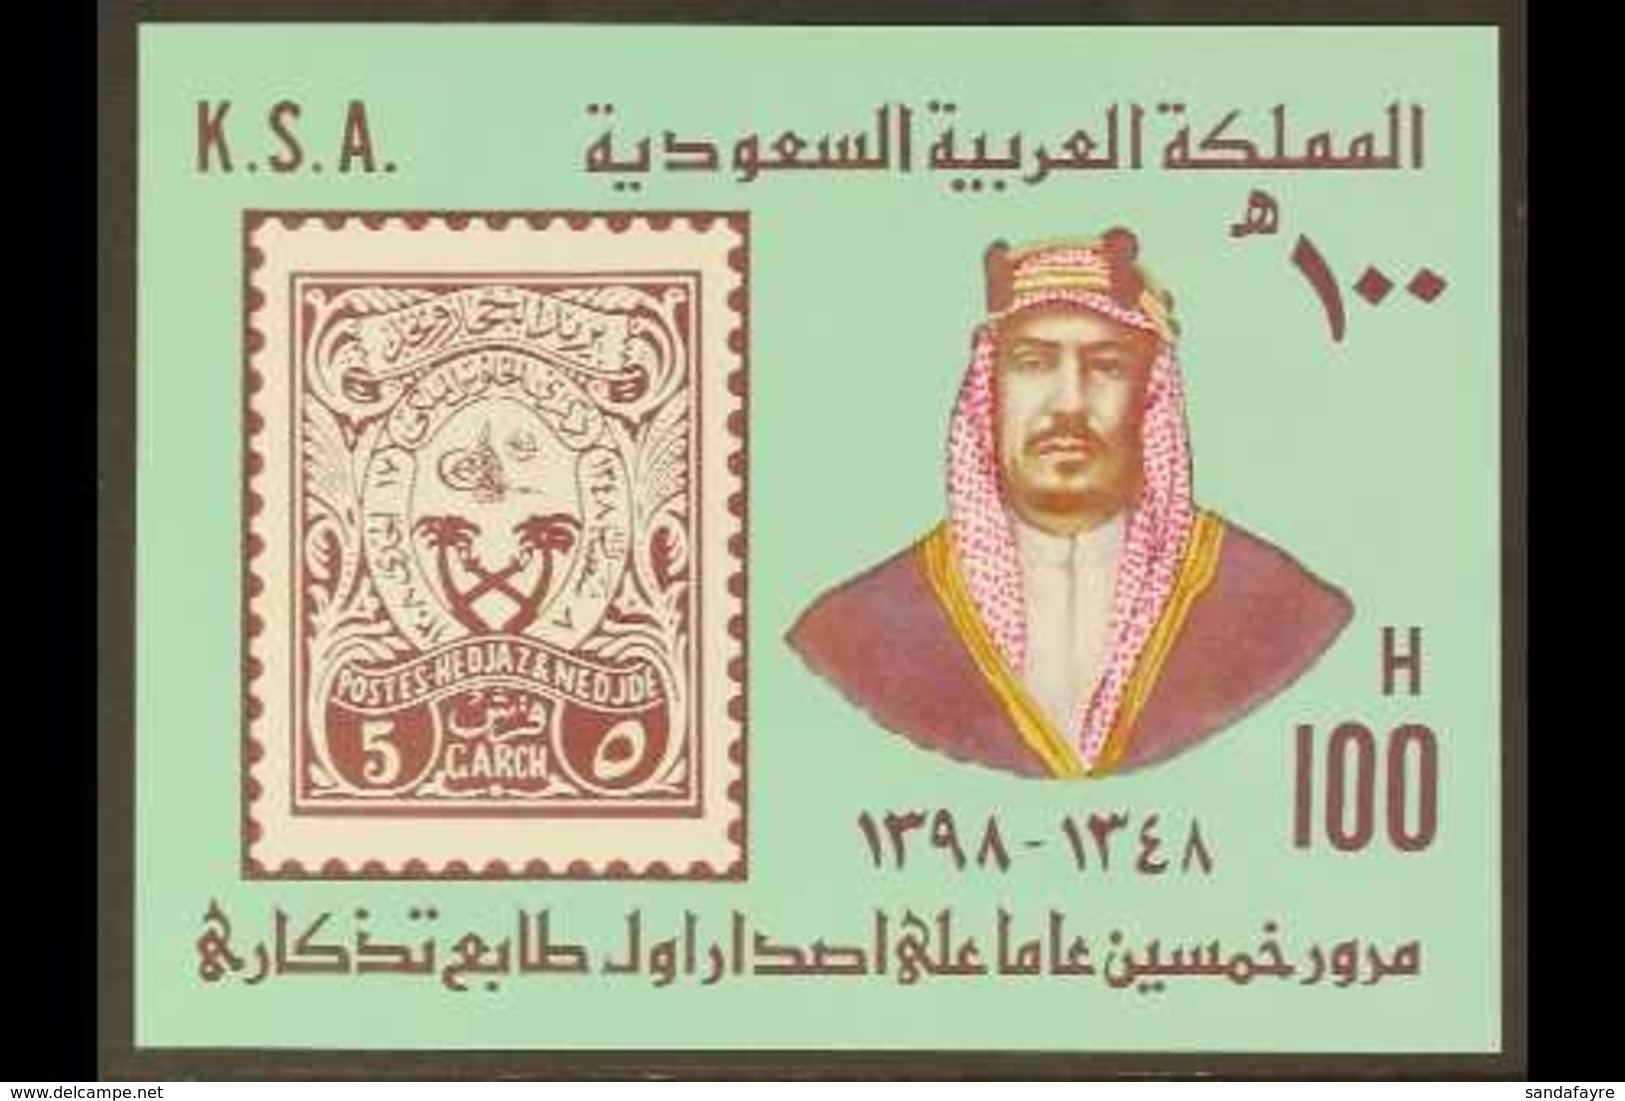 1979 100h Stamp Anniversary Imperf Miniature Sheet, SG MS1223, Never Hinged Mint. For More Images, Please Visit Http://w - Saoedi-Arabië